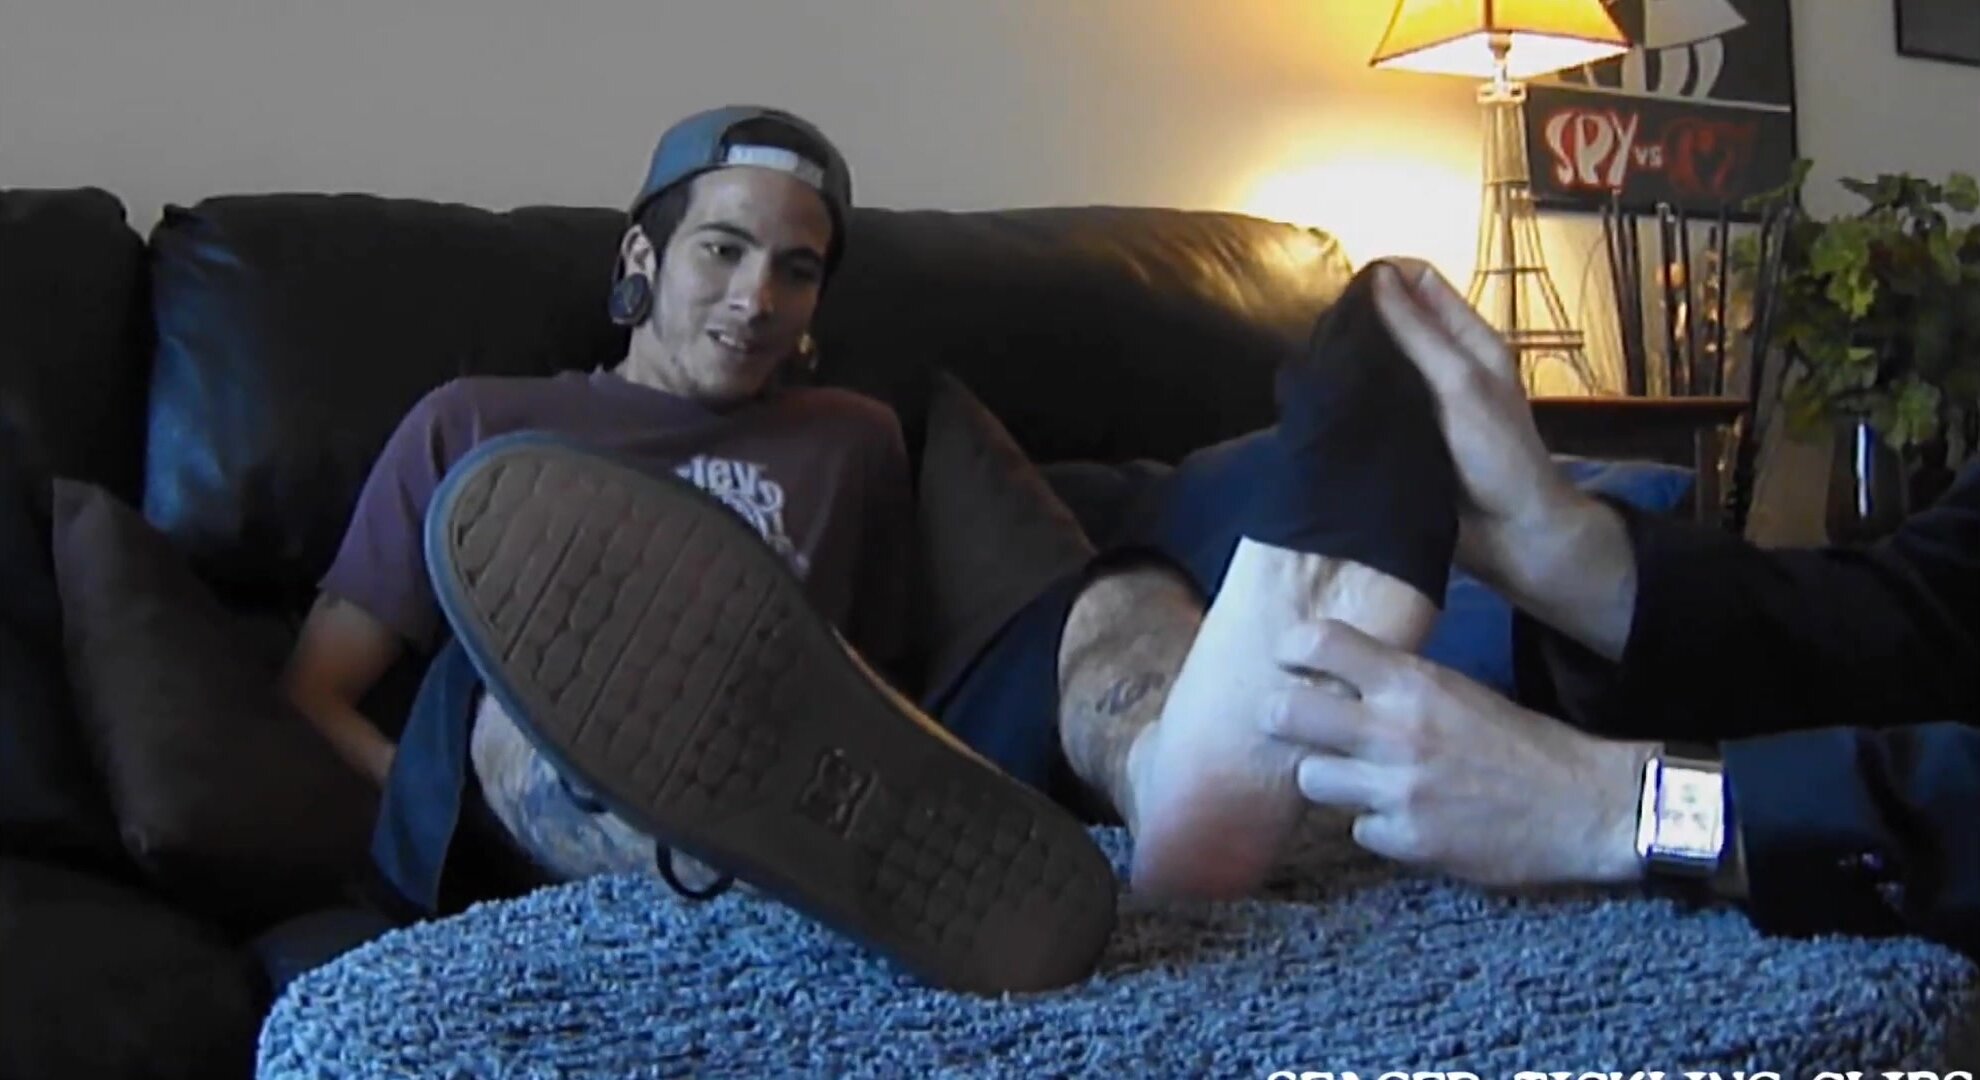 Sexy Skater Soles Tickled